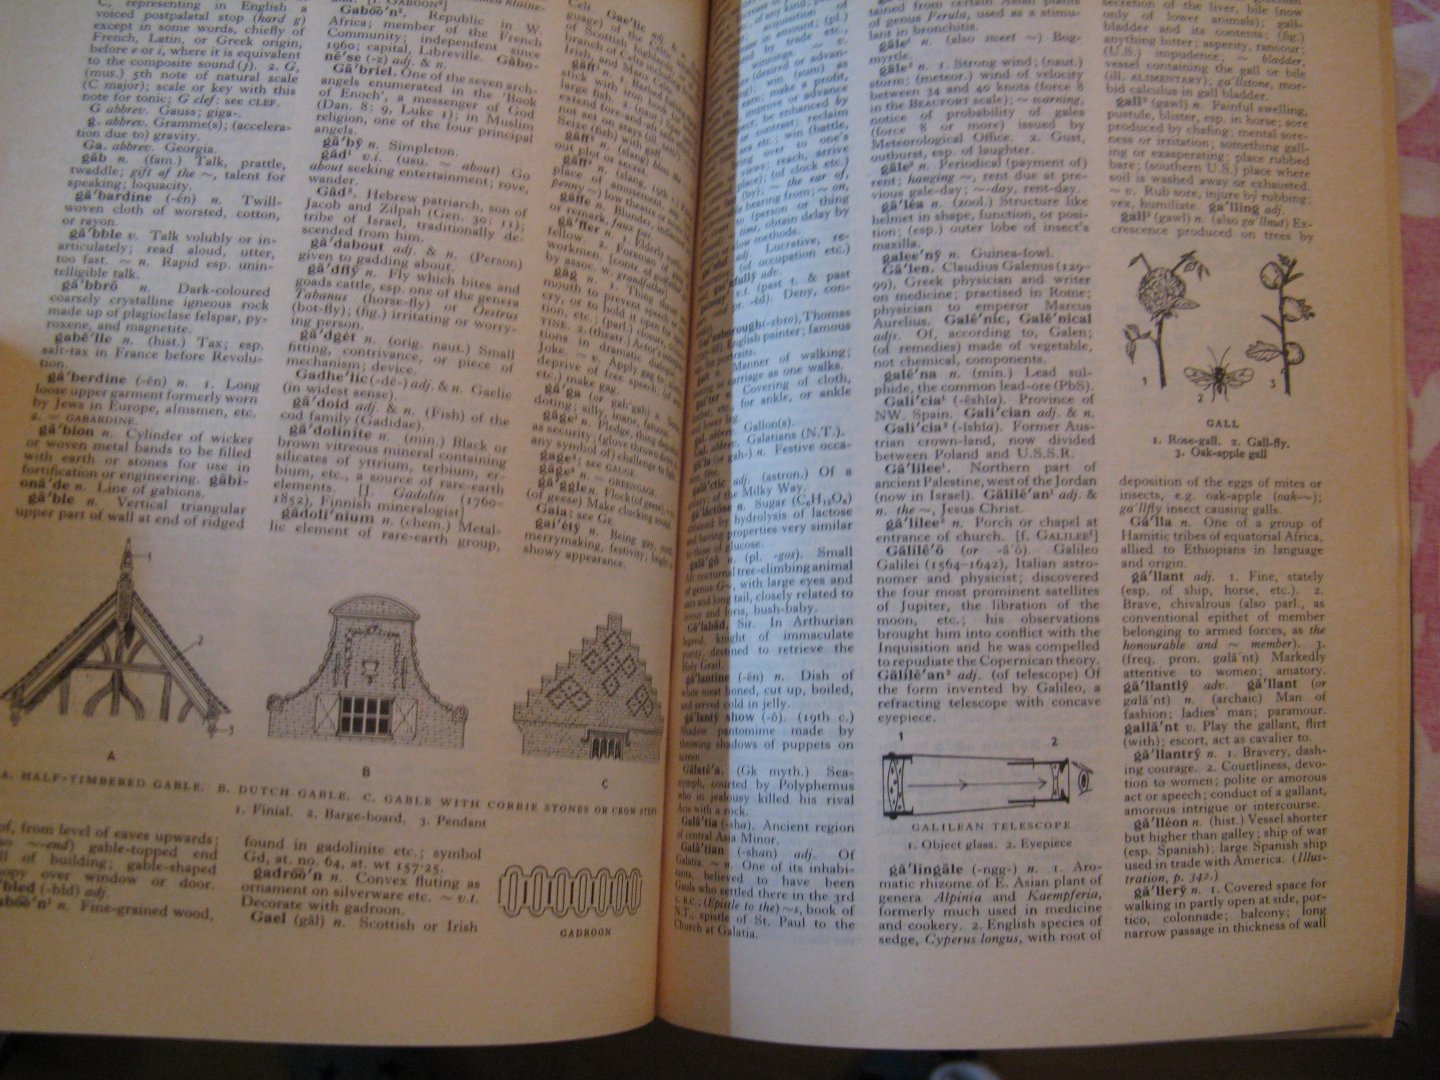 J. coulson - the oxford illustrated dictionary